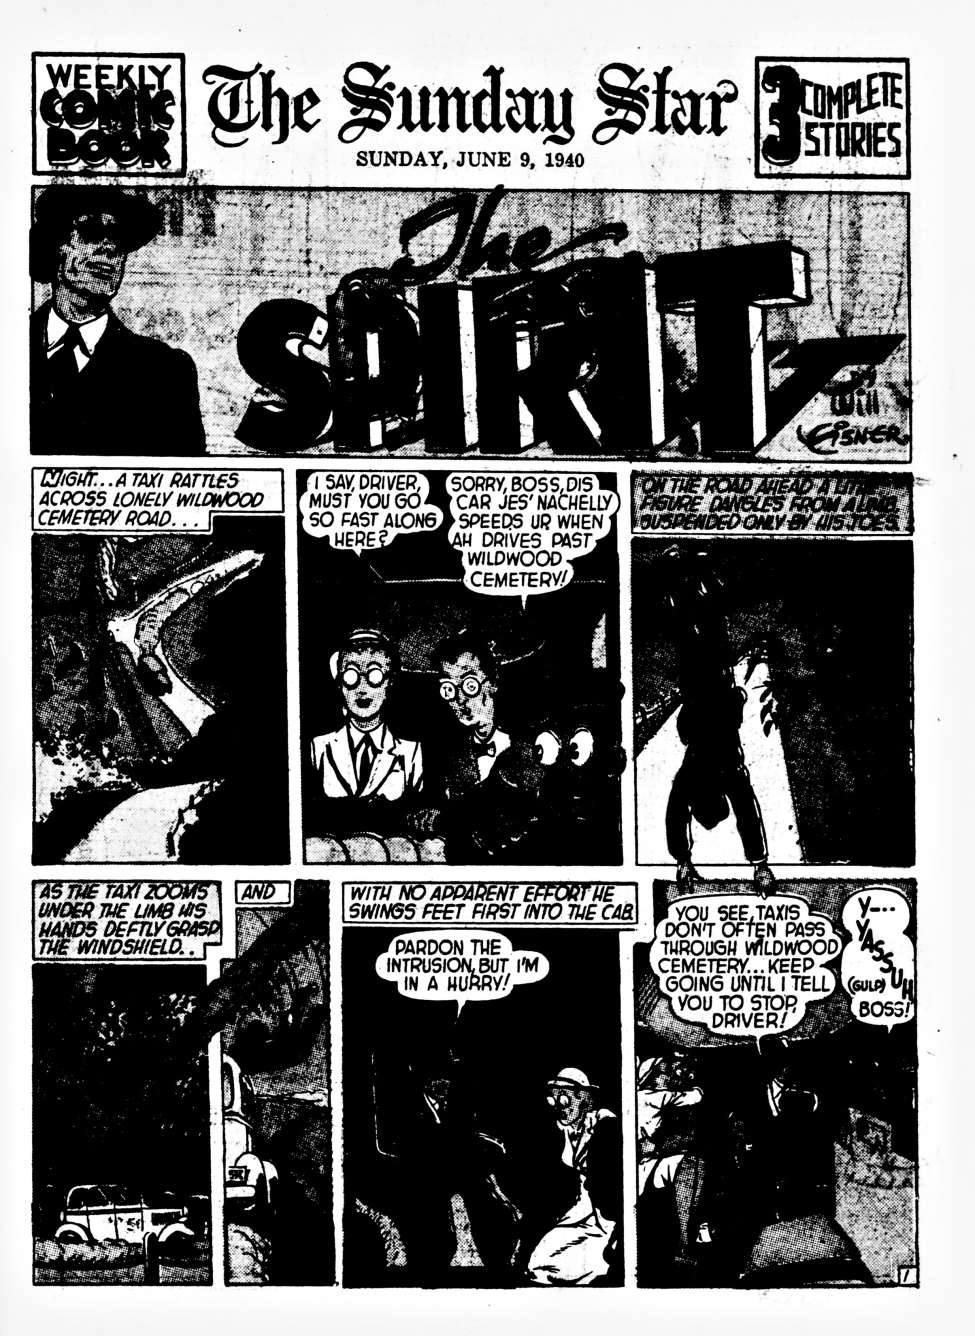 Book Cover For The Spirit (1940-06-09) - Sunday Star (b/w)